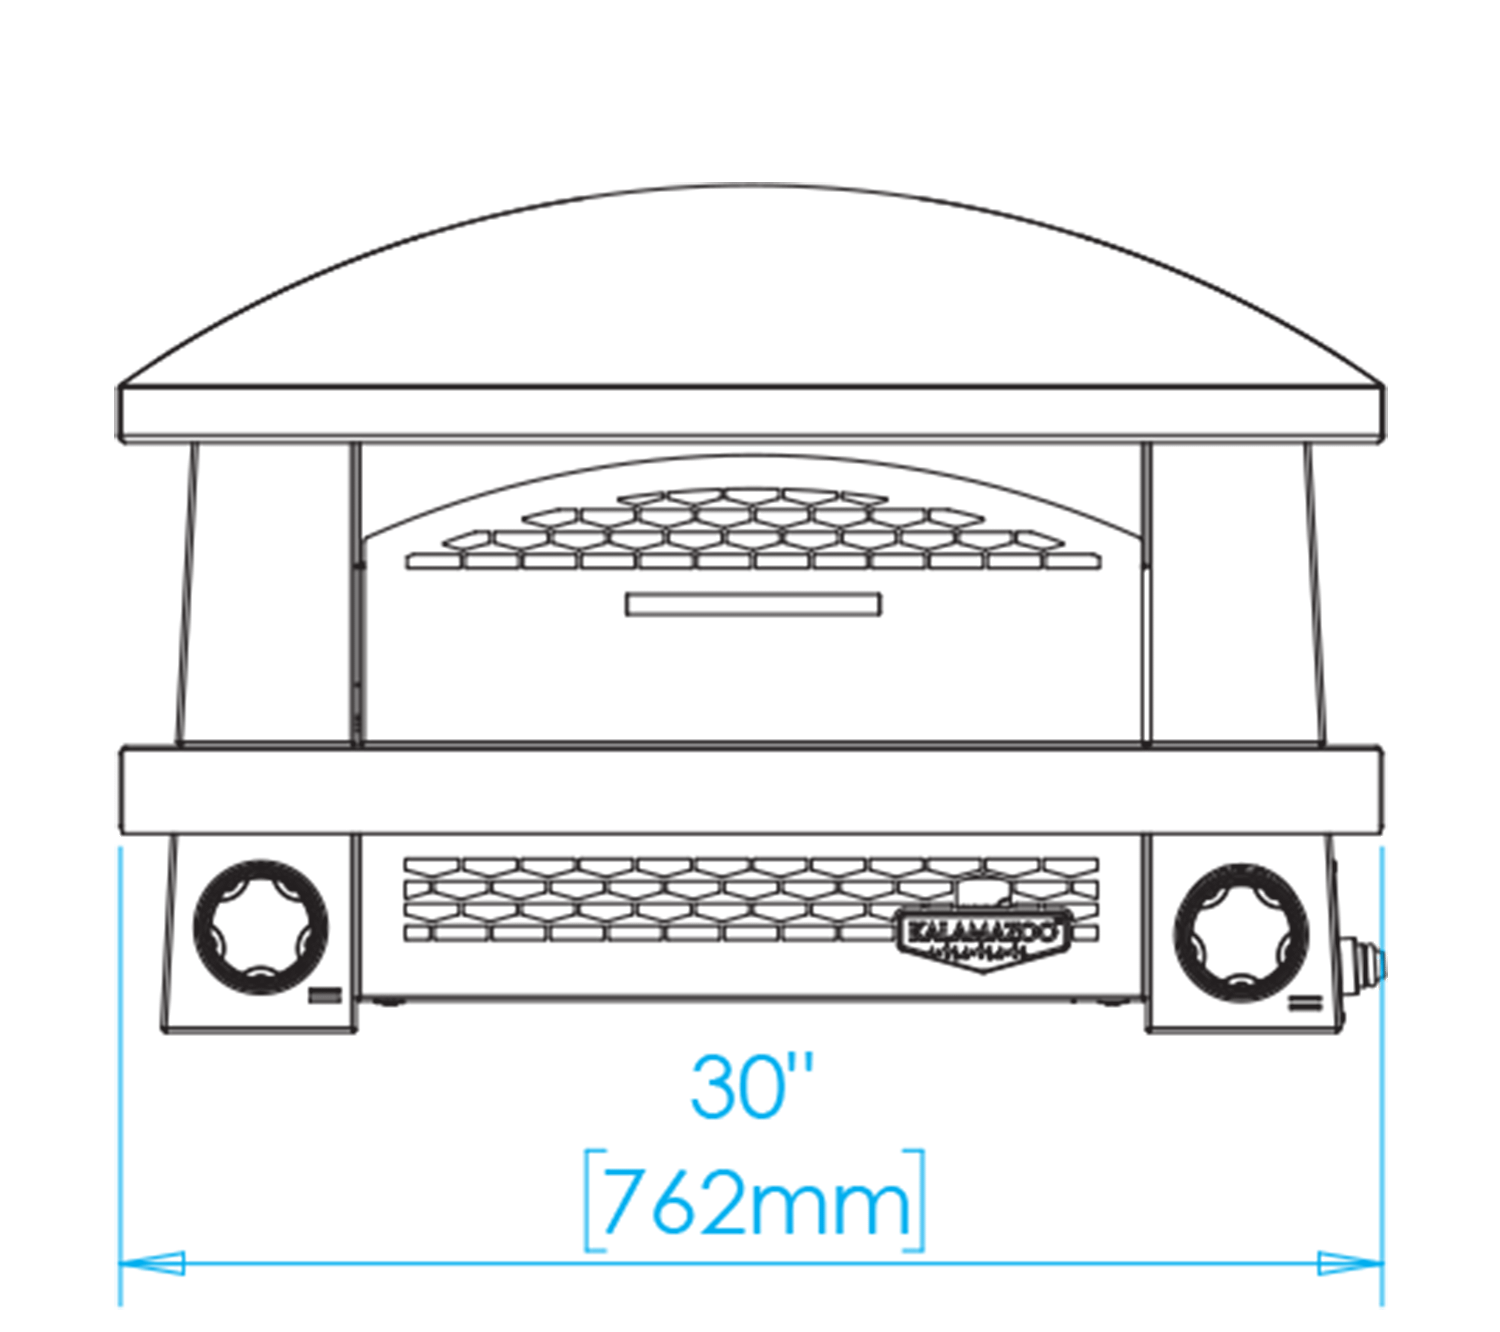 AFPO-C Countertop Artisan Fire Pizza Oven Dimensions Image